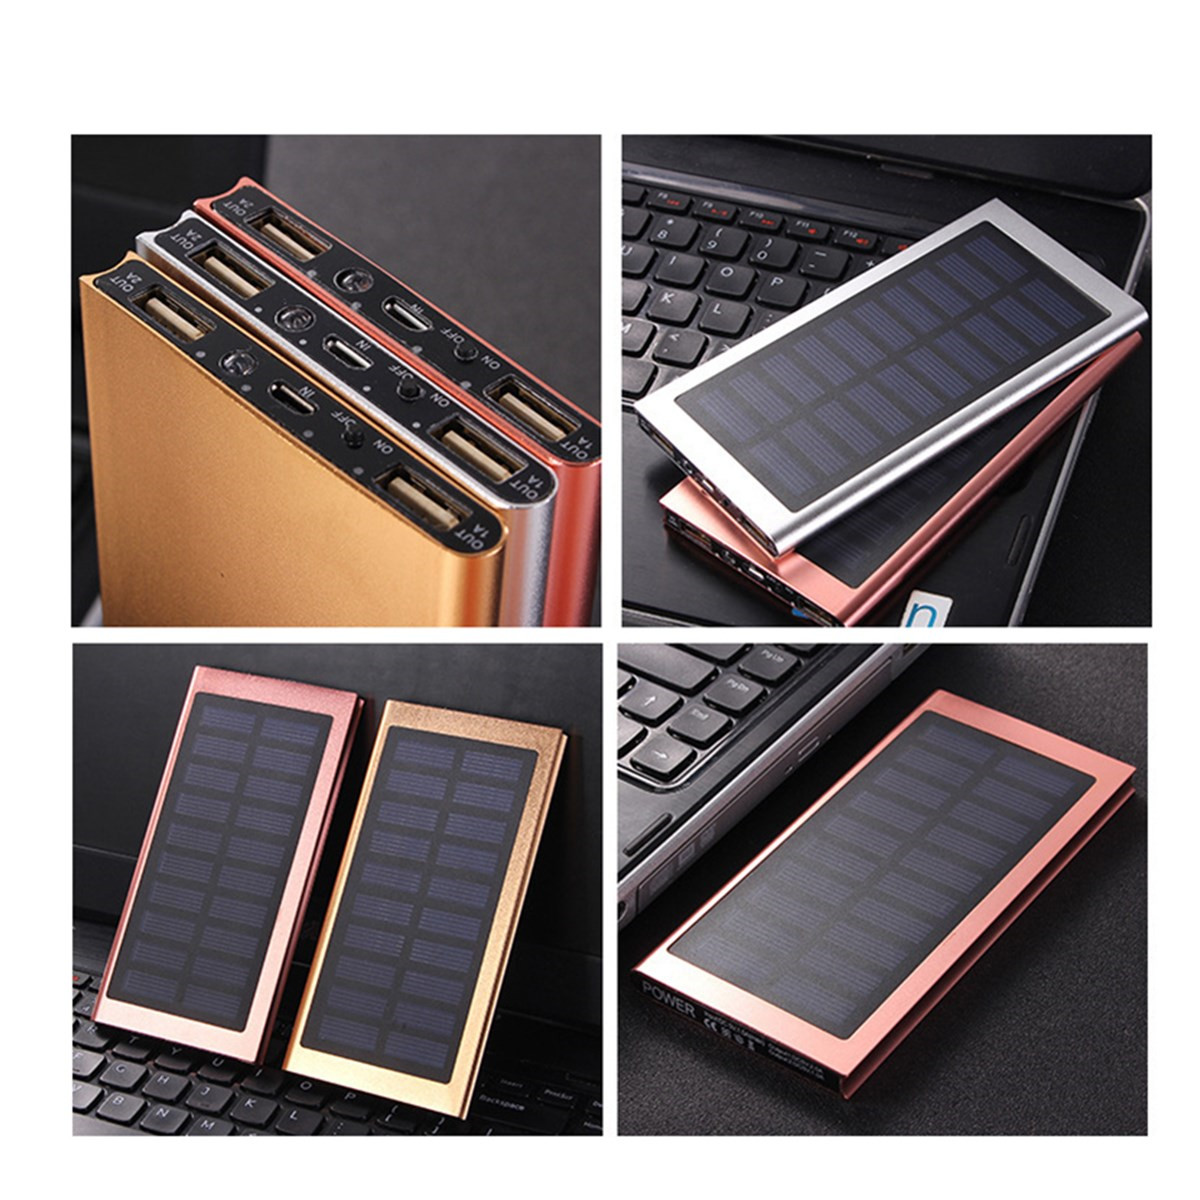 10000mAh-Portable-Solar-Power-Bank-Dual-USB-Fast-Charger-DIY-Case-For-Mobile-Phone-1233321